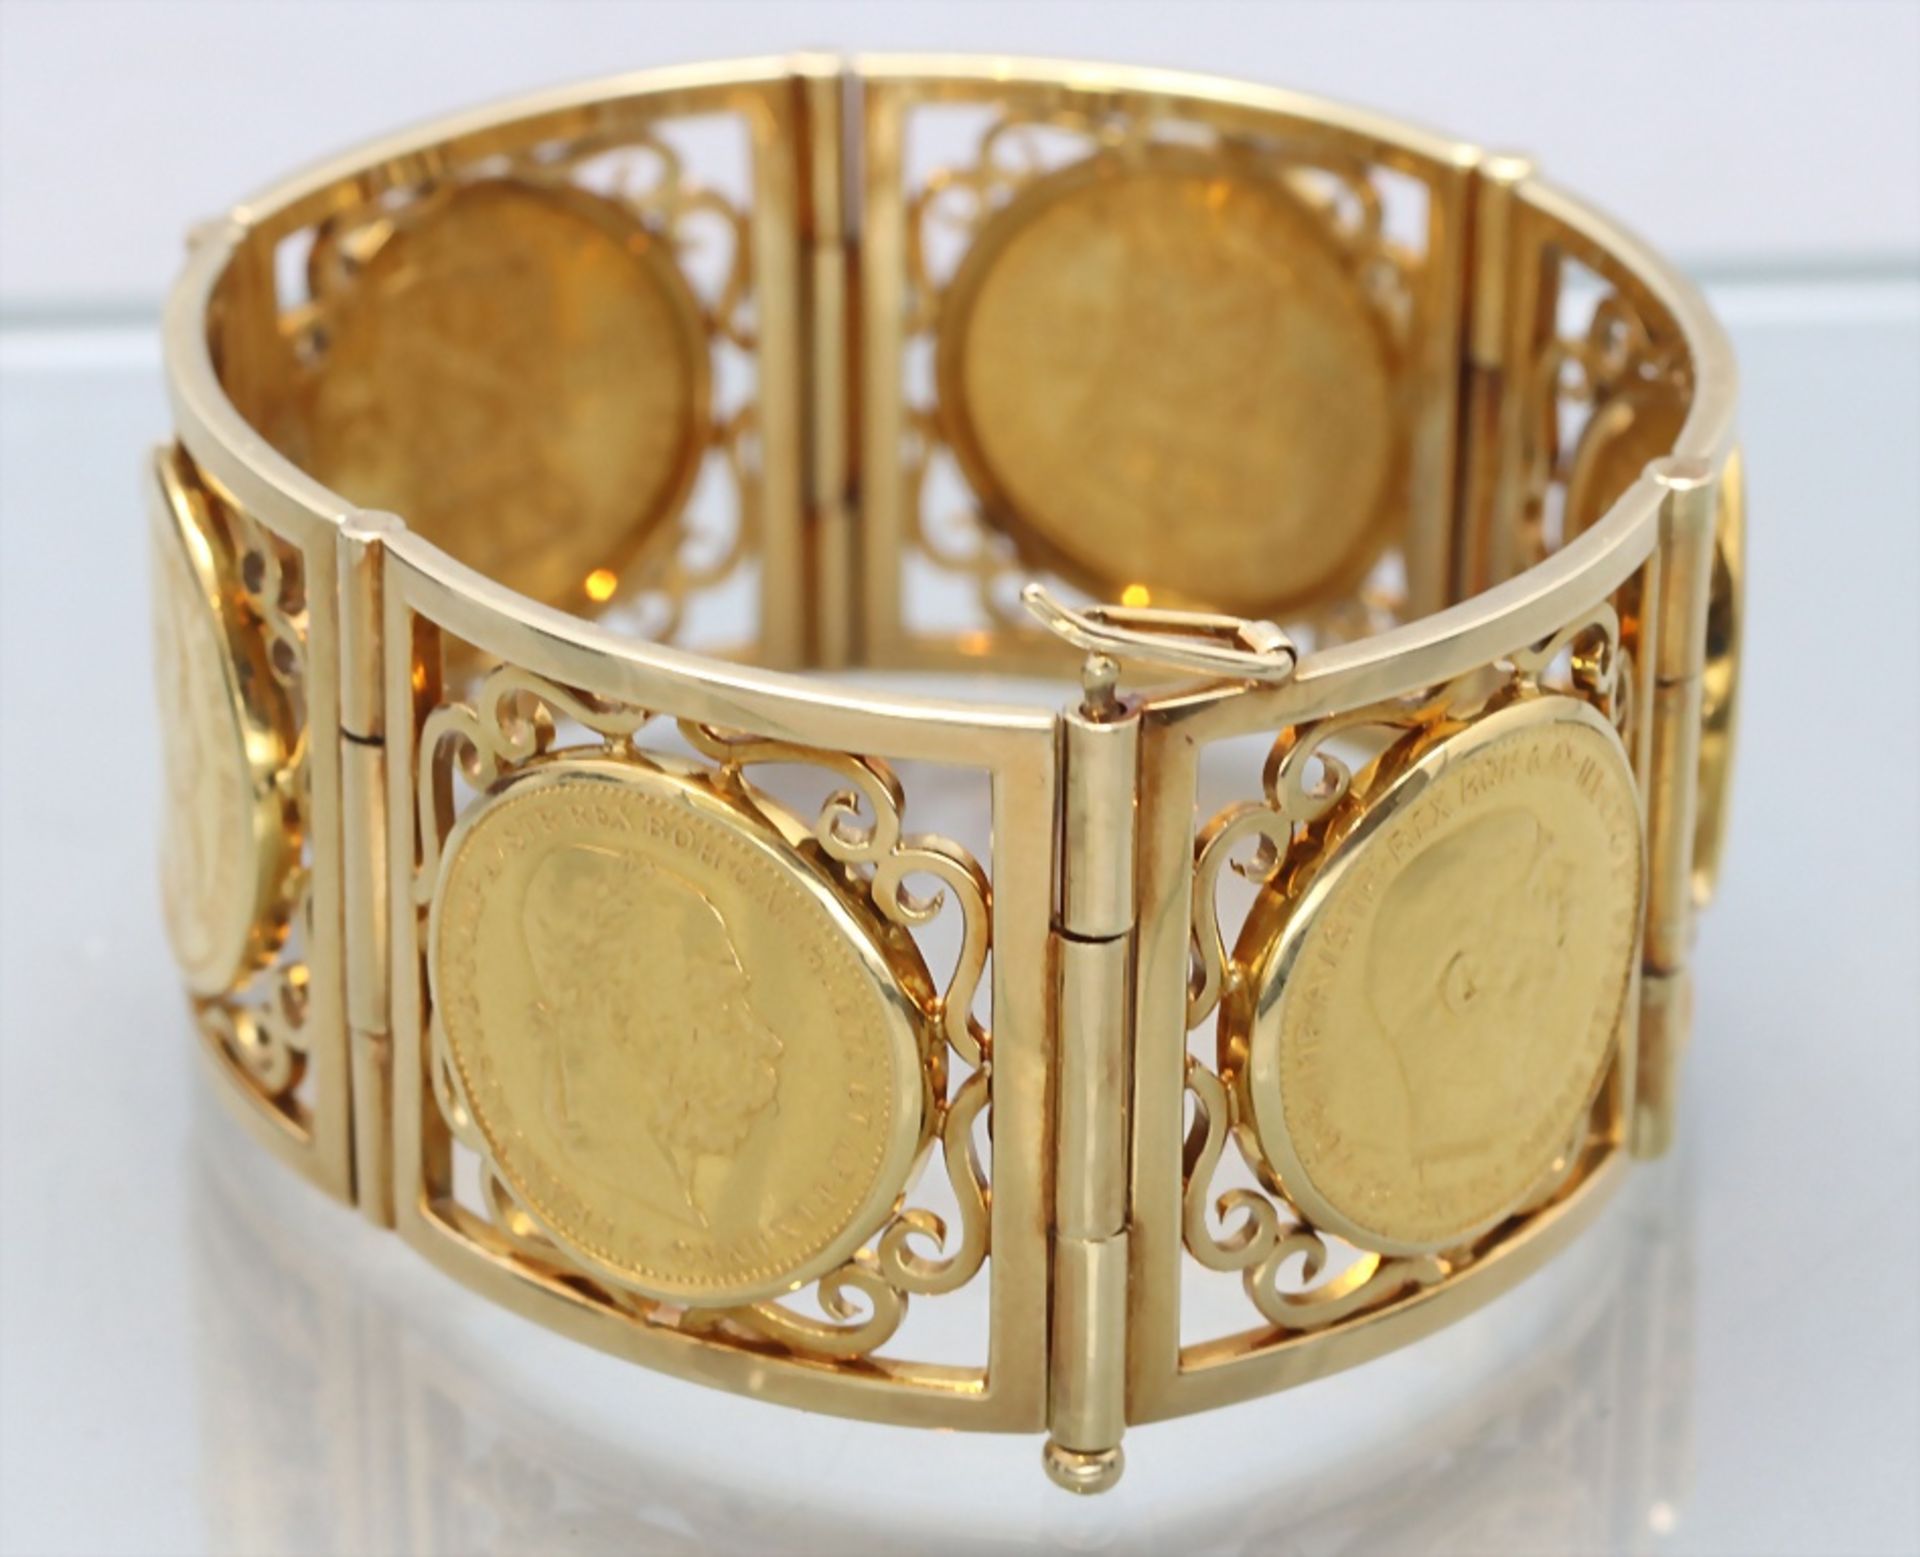 Münzarmband / An 18 ct gold coin bracelet - Image 4 of 7